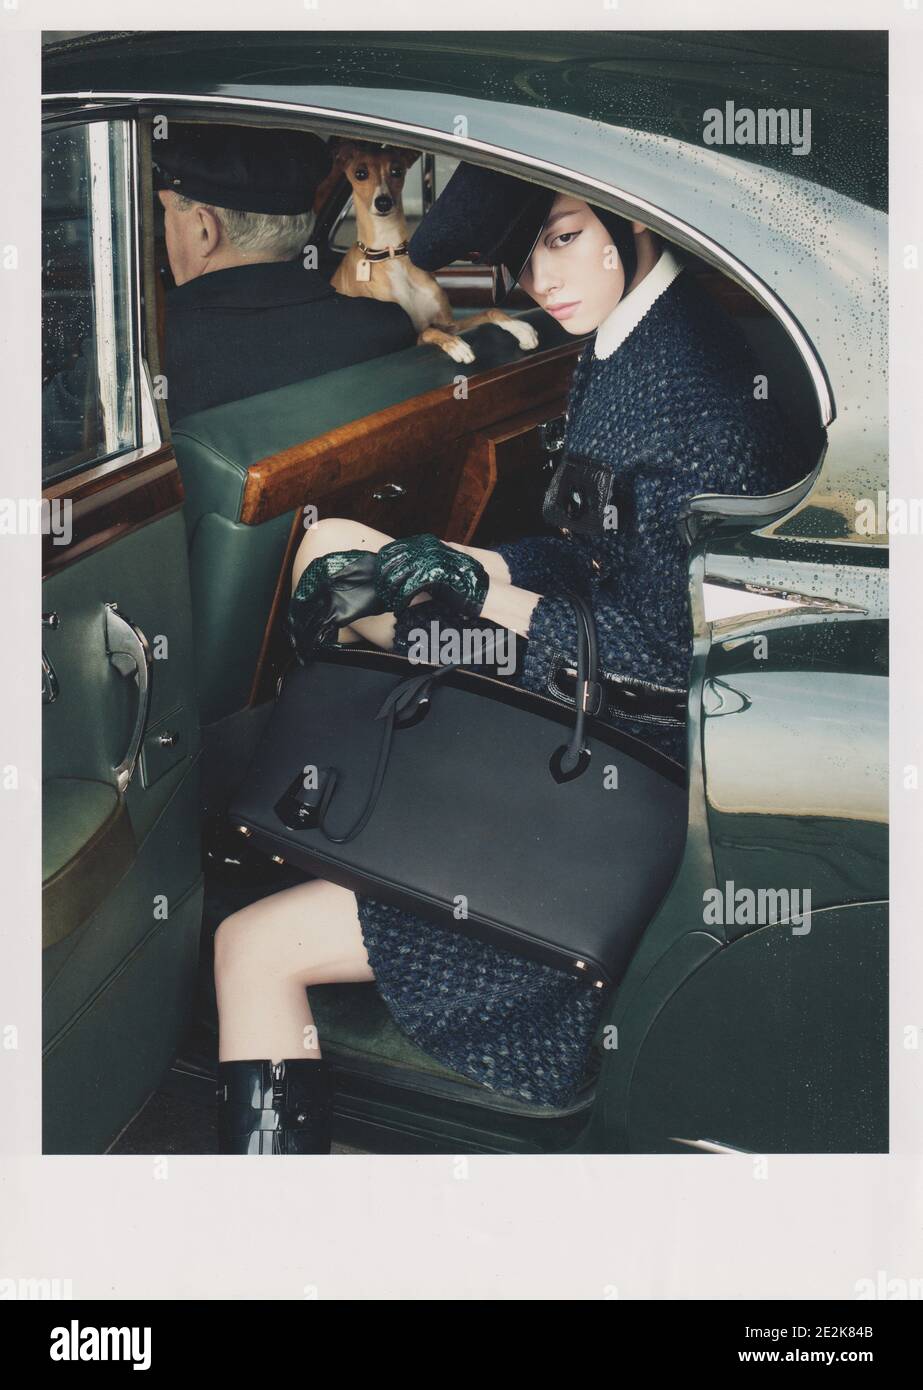 poster advertising Louis Vuitton handbag in paper magazine from 2013 year,  advertisement, creative LV Louis Vuitton advert from 2010s Stock Photo -  Alamy